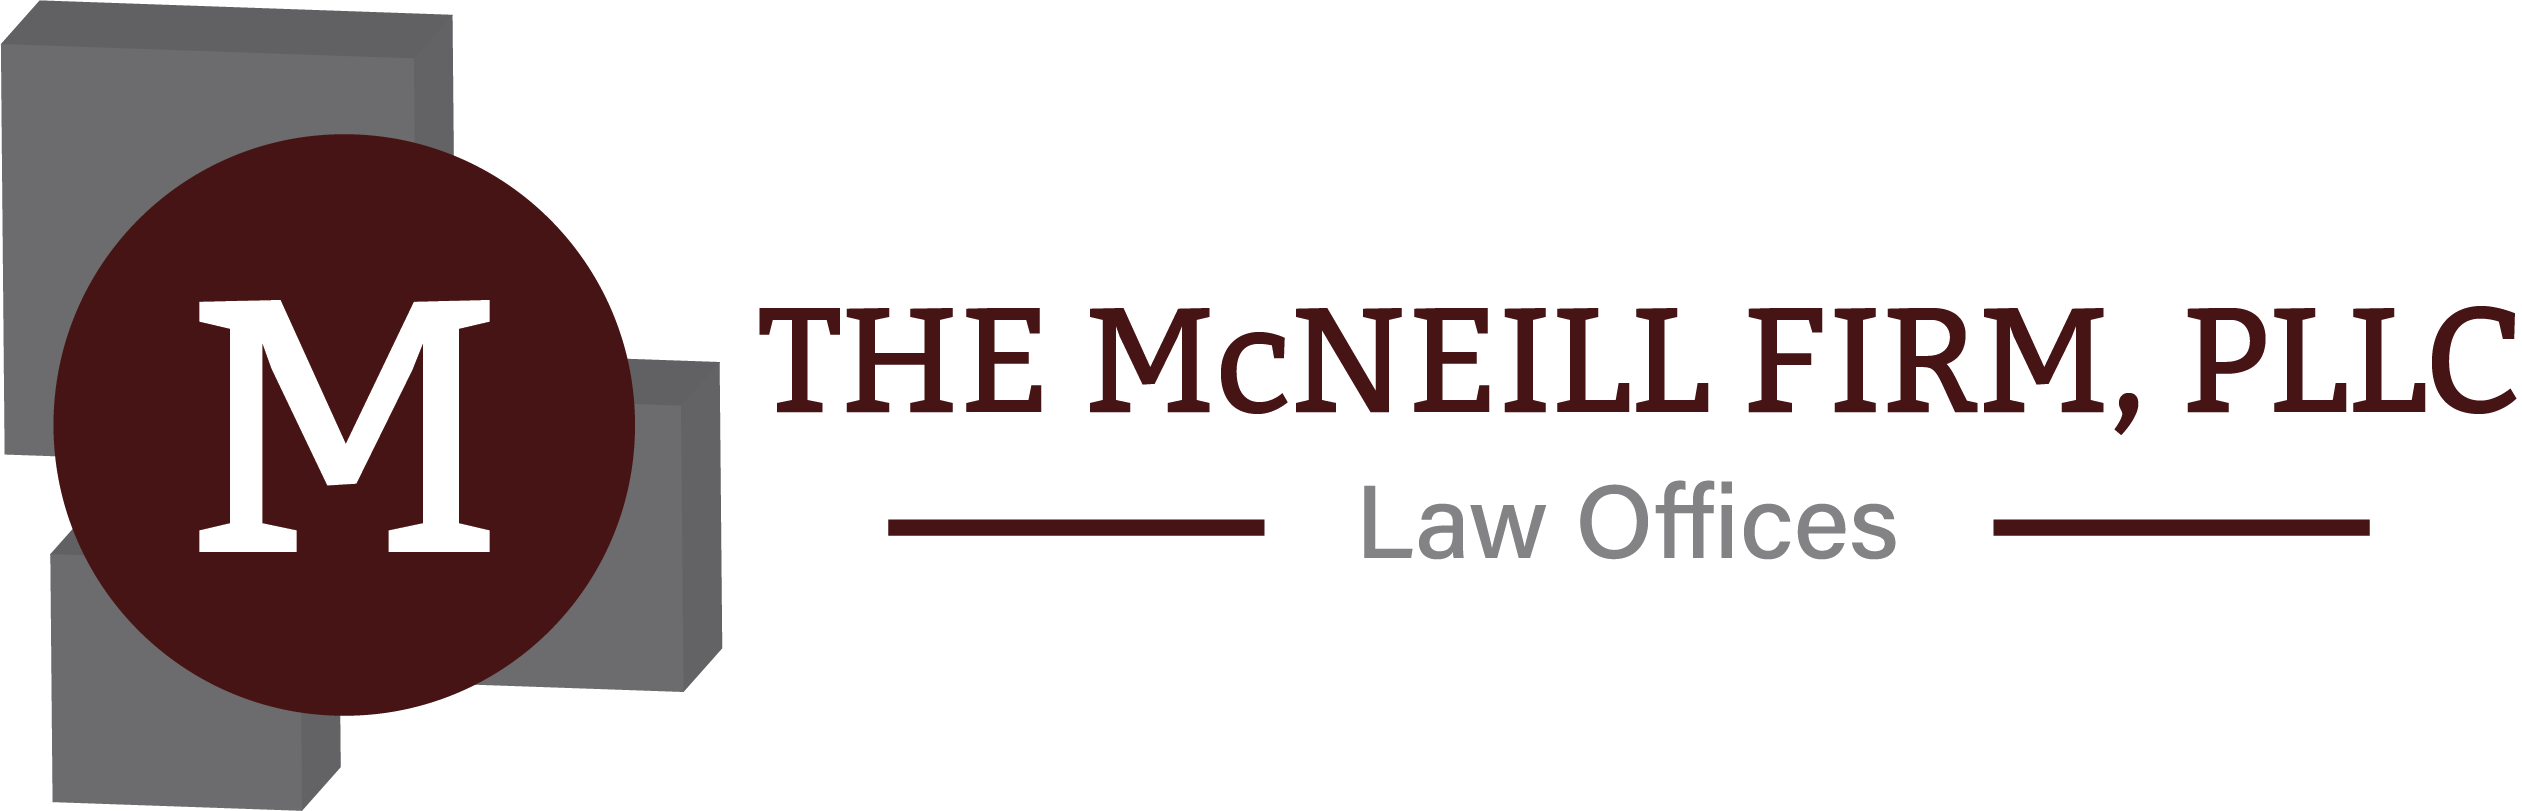 The McNeill Firm, PLLC